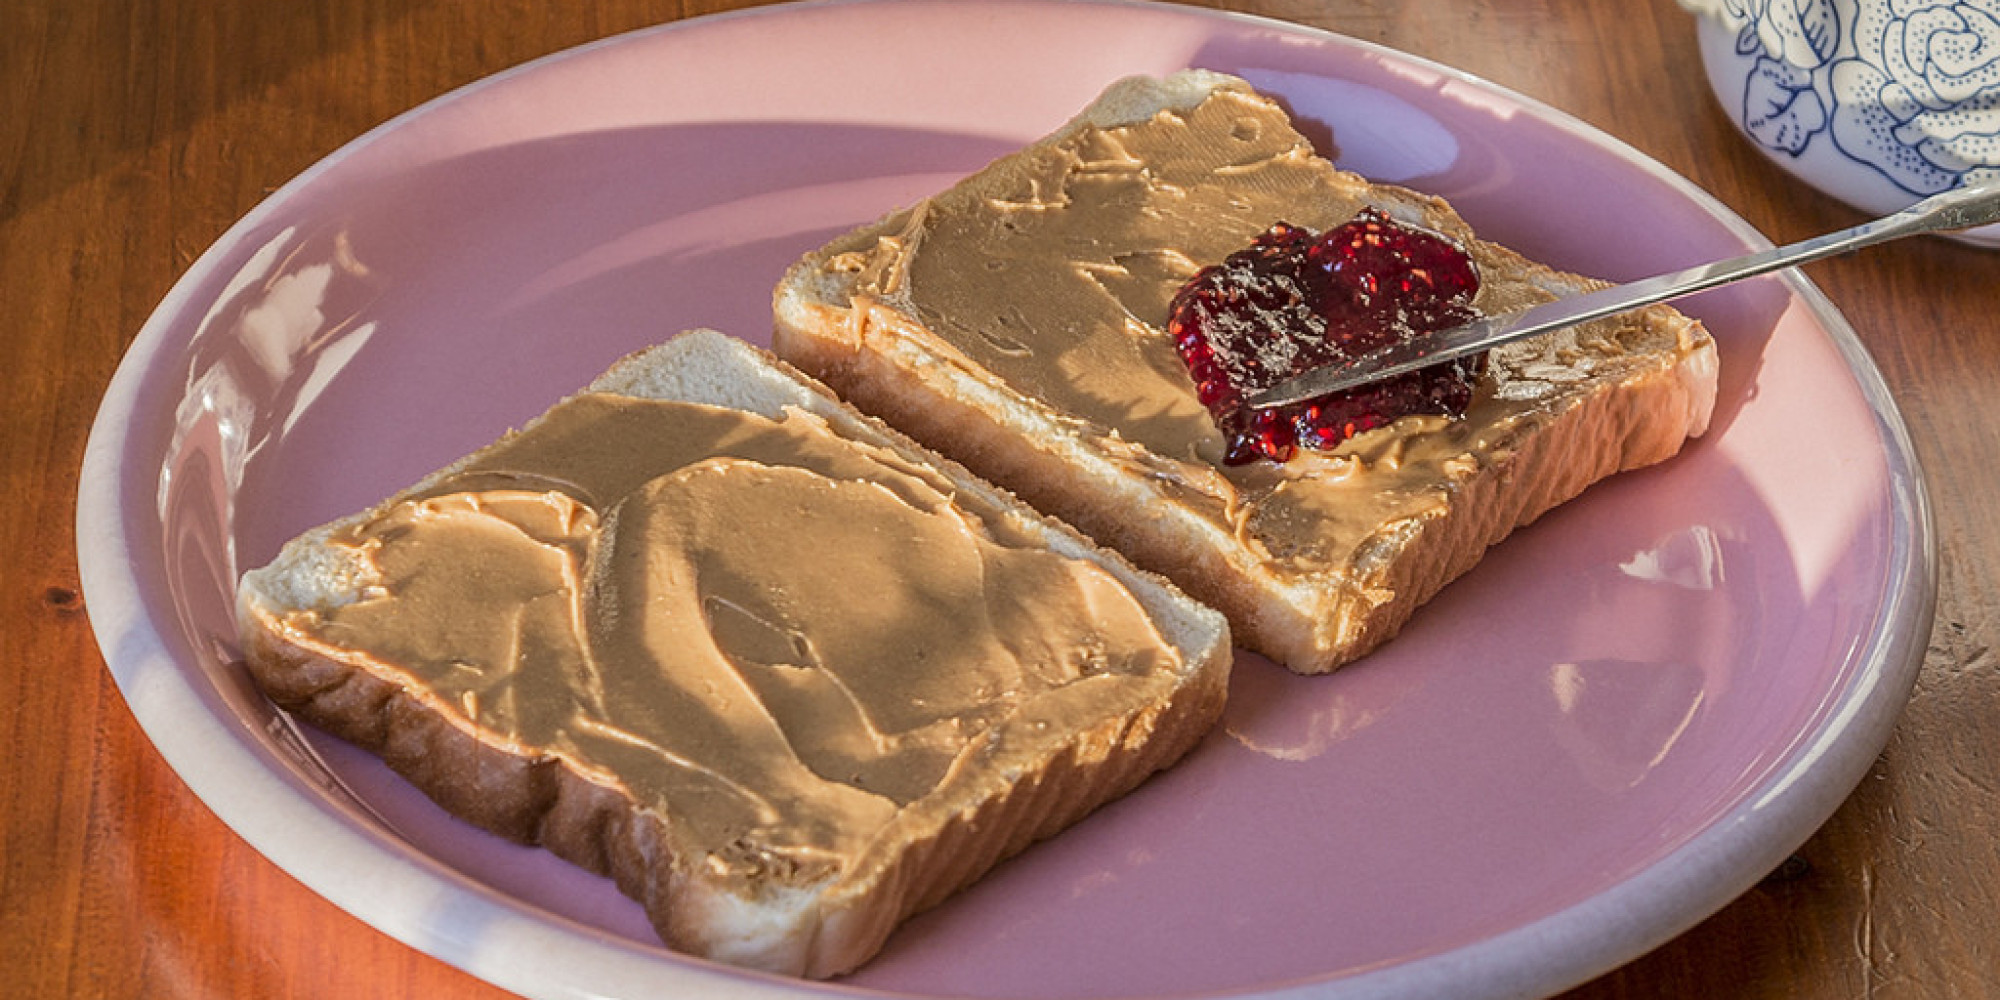 15 Ways to Upgrade Your Peanut Butter Sandwich